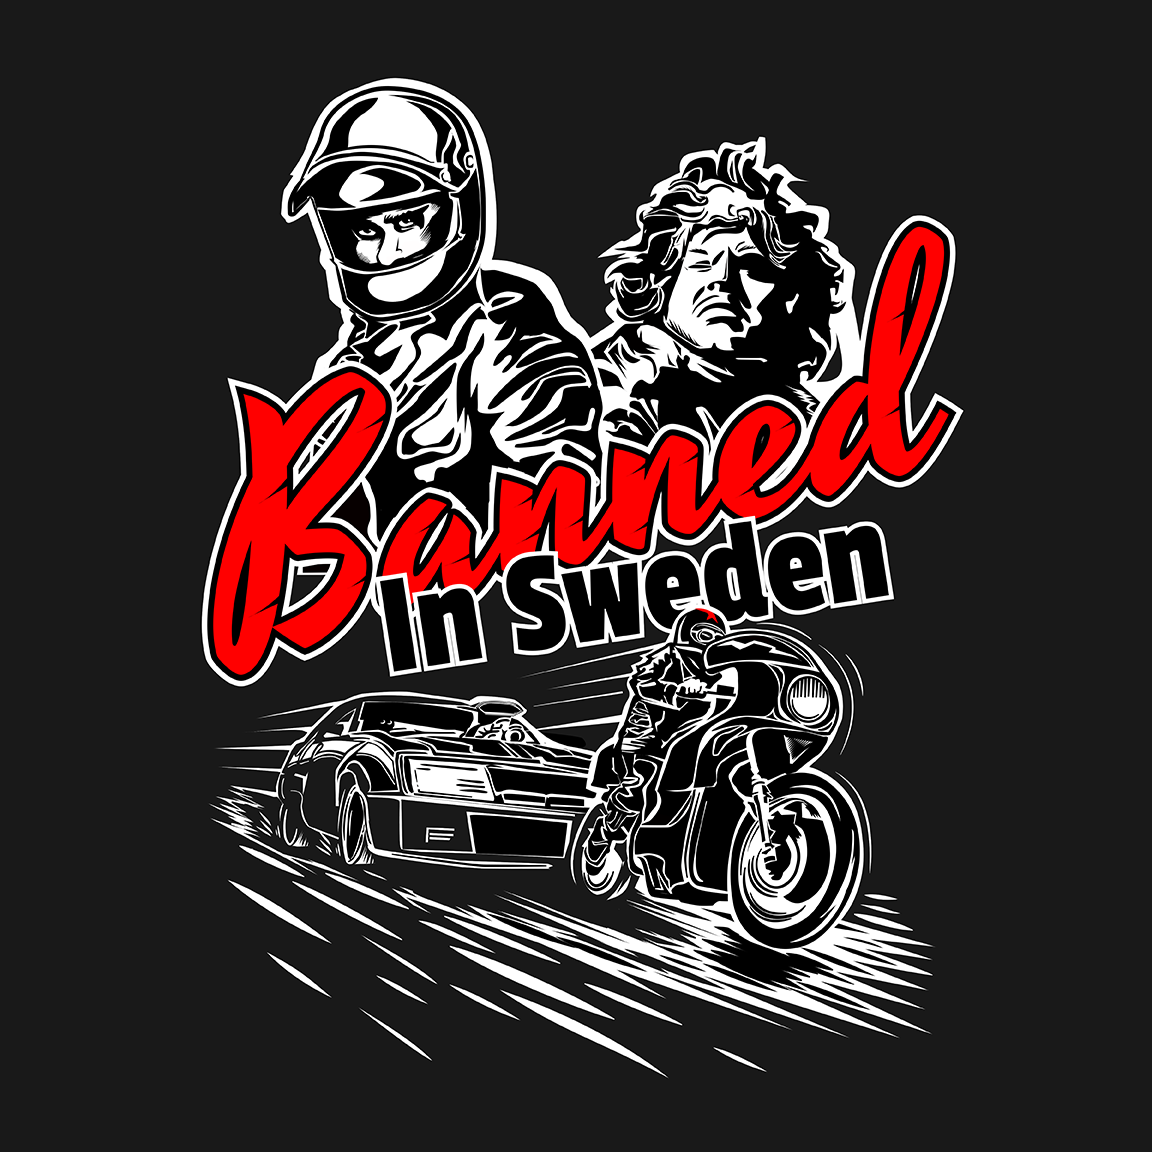 05 - Banned in Sweden - Mad Max T-shirt